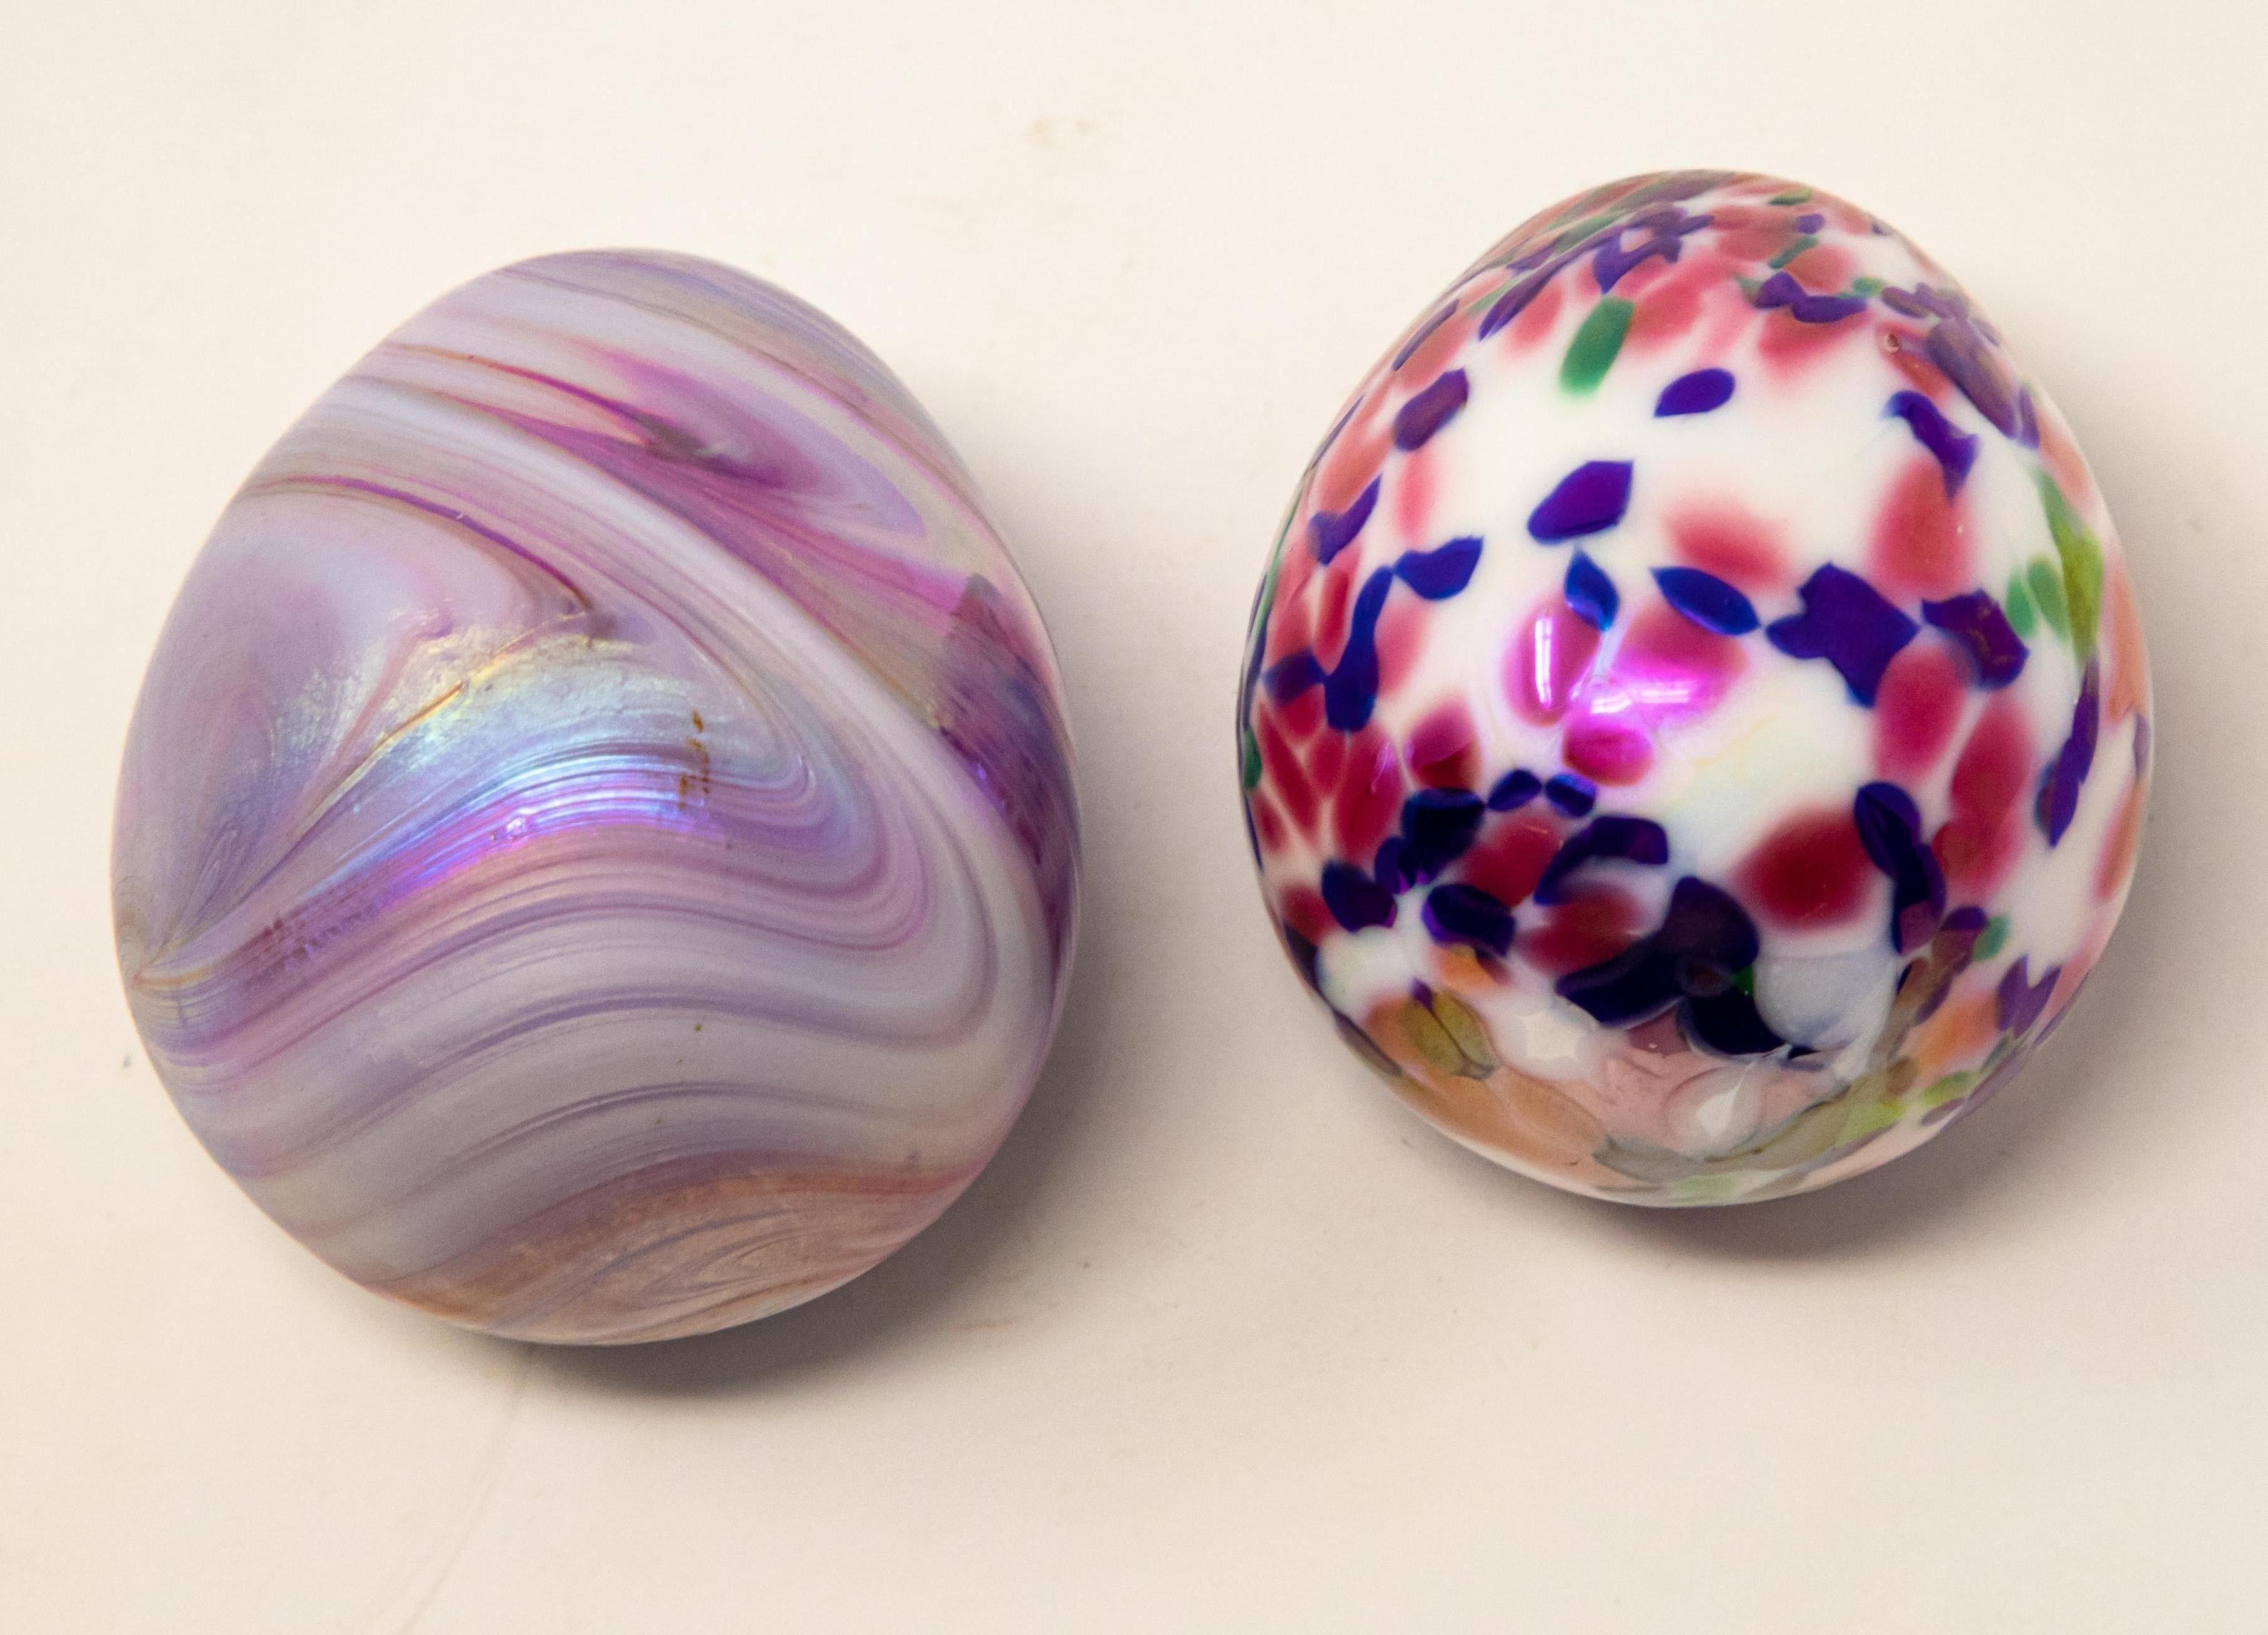 Offering a unique pair of art glass eggs. One is white with blue, green and pink dots, and the other is iridescent in purples and silvers.